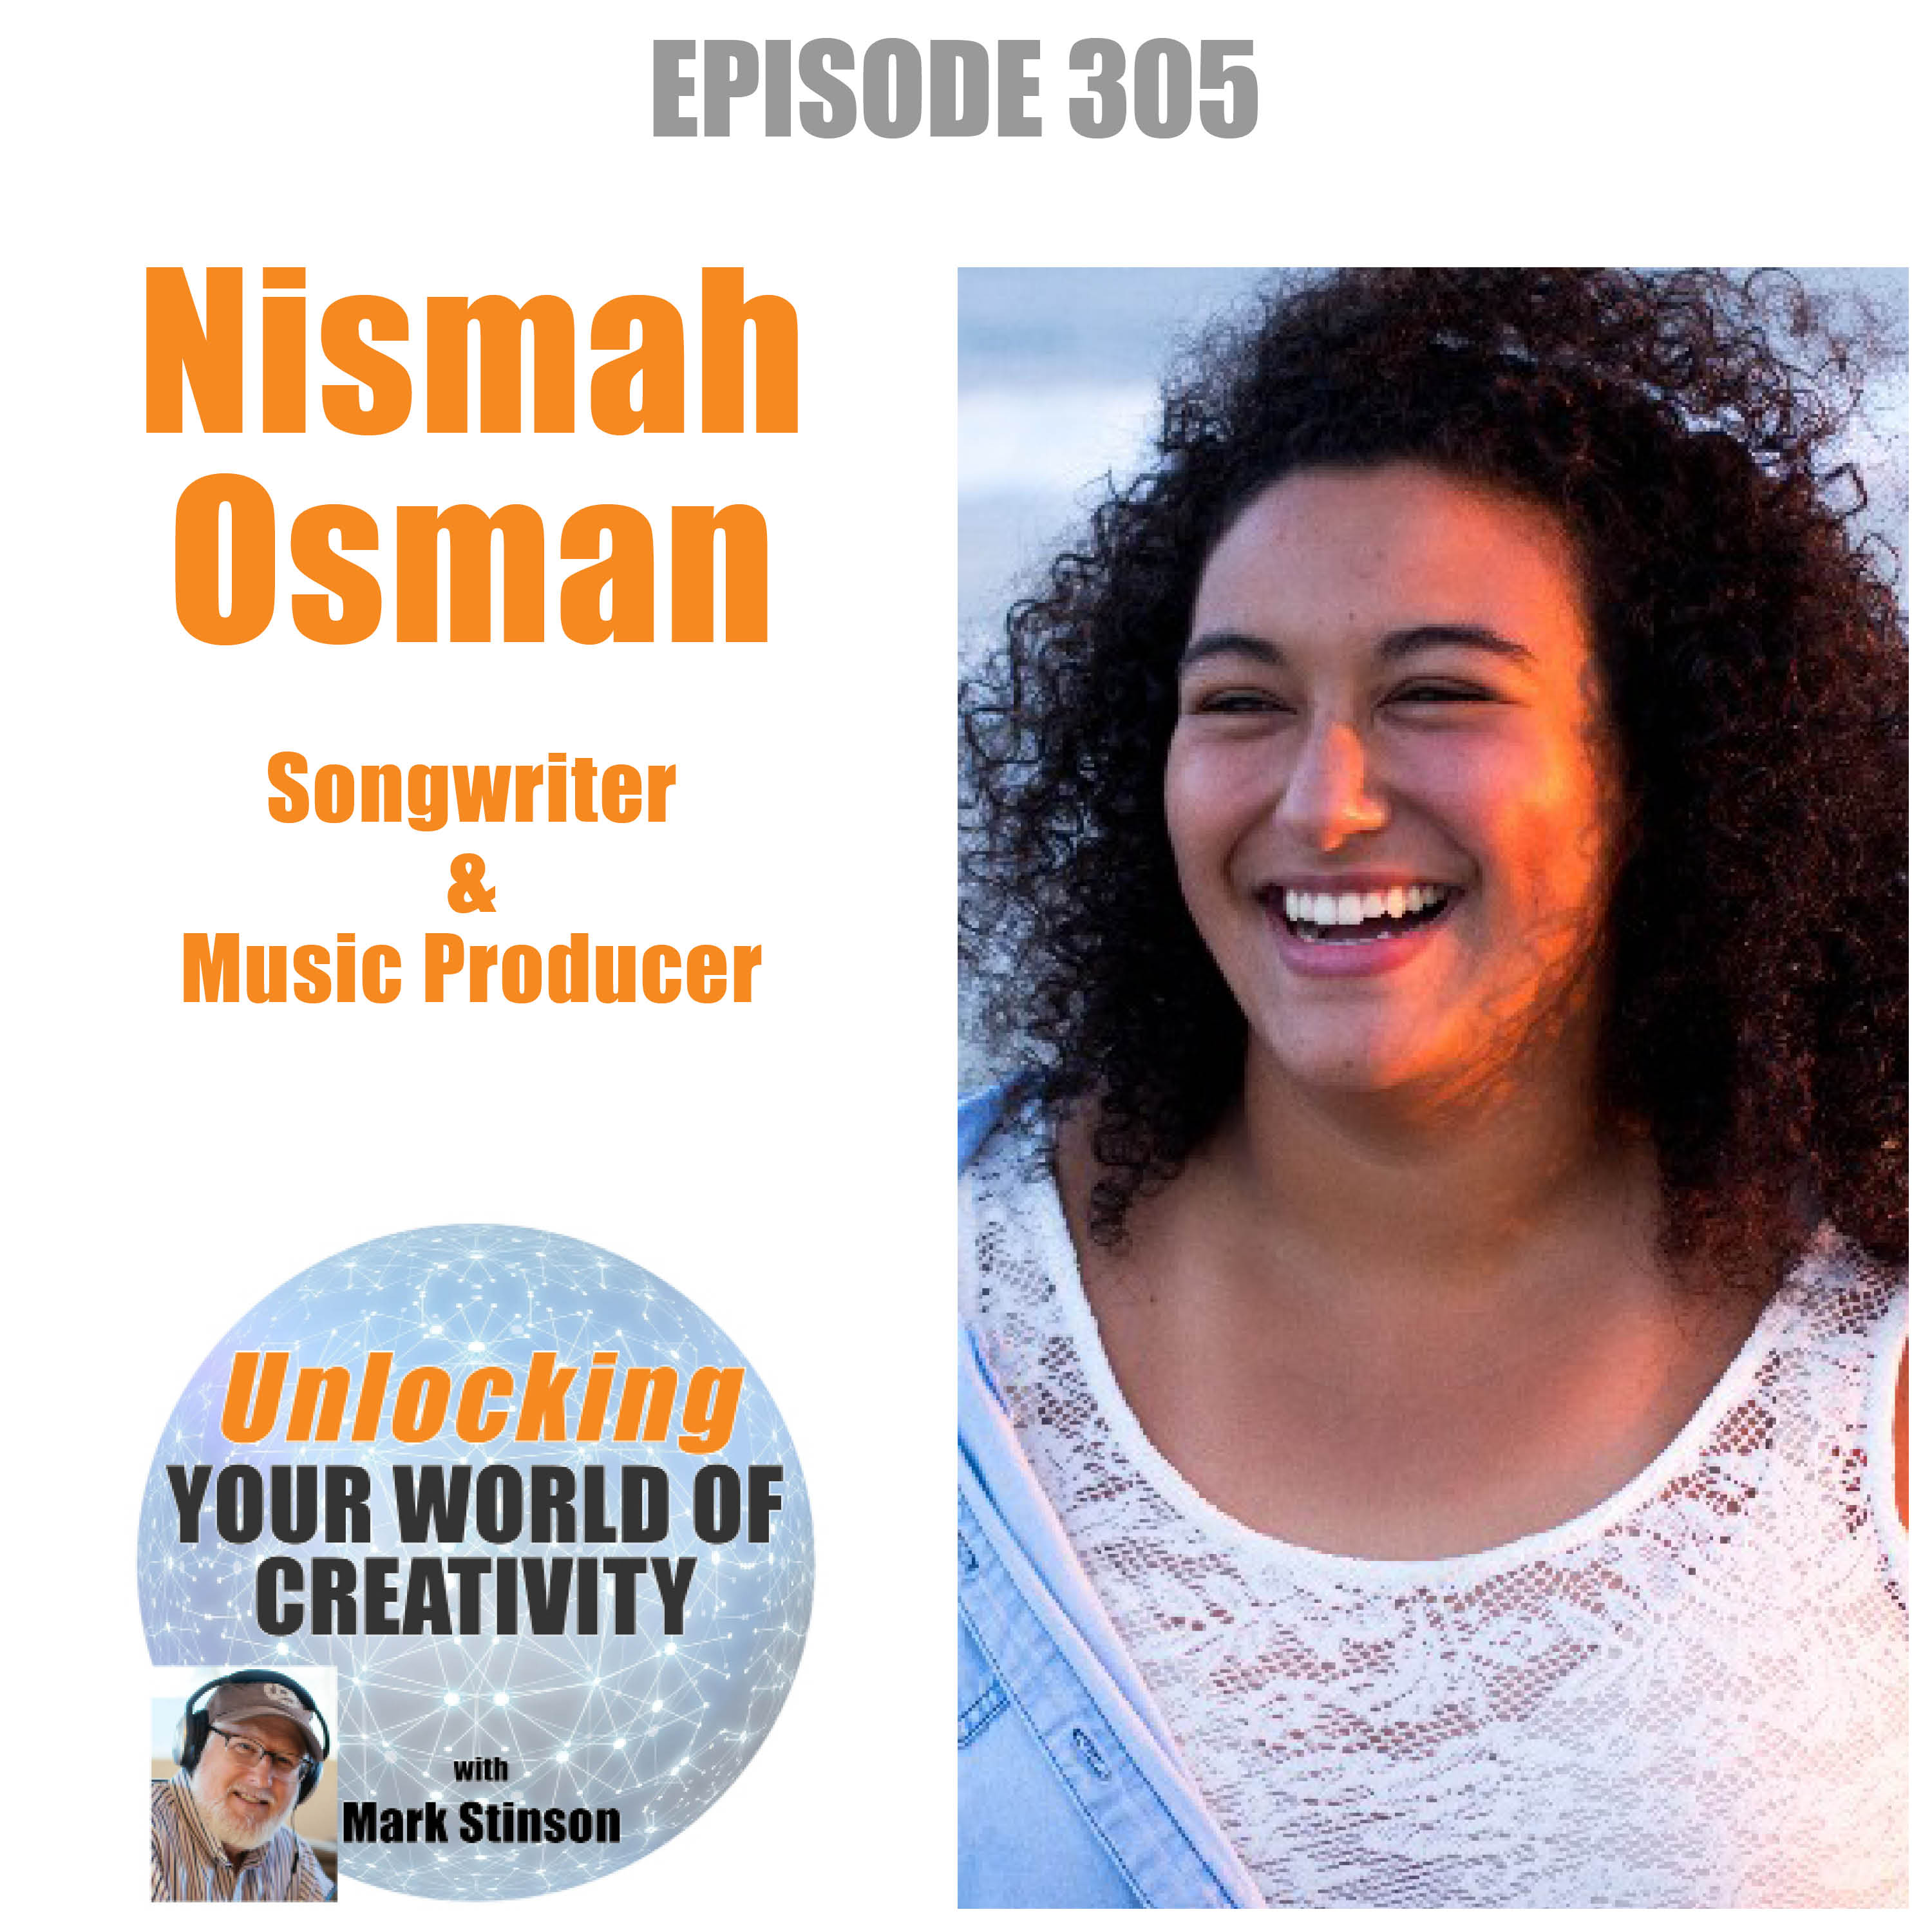 Nismah Osman, Songwriter and Music Producer